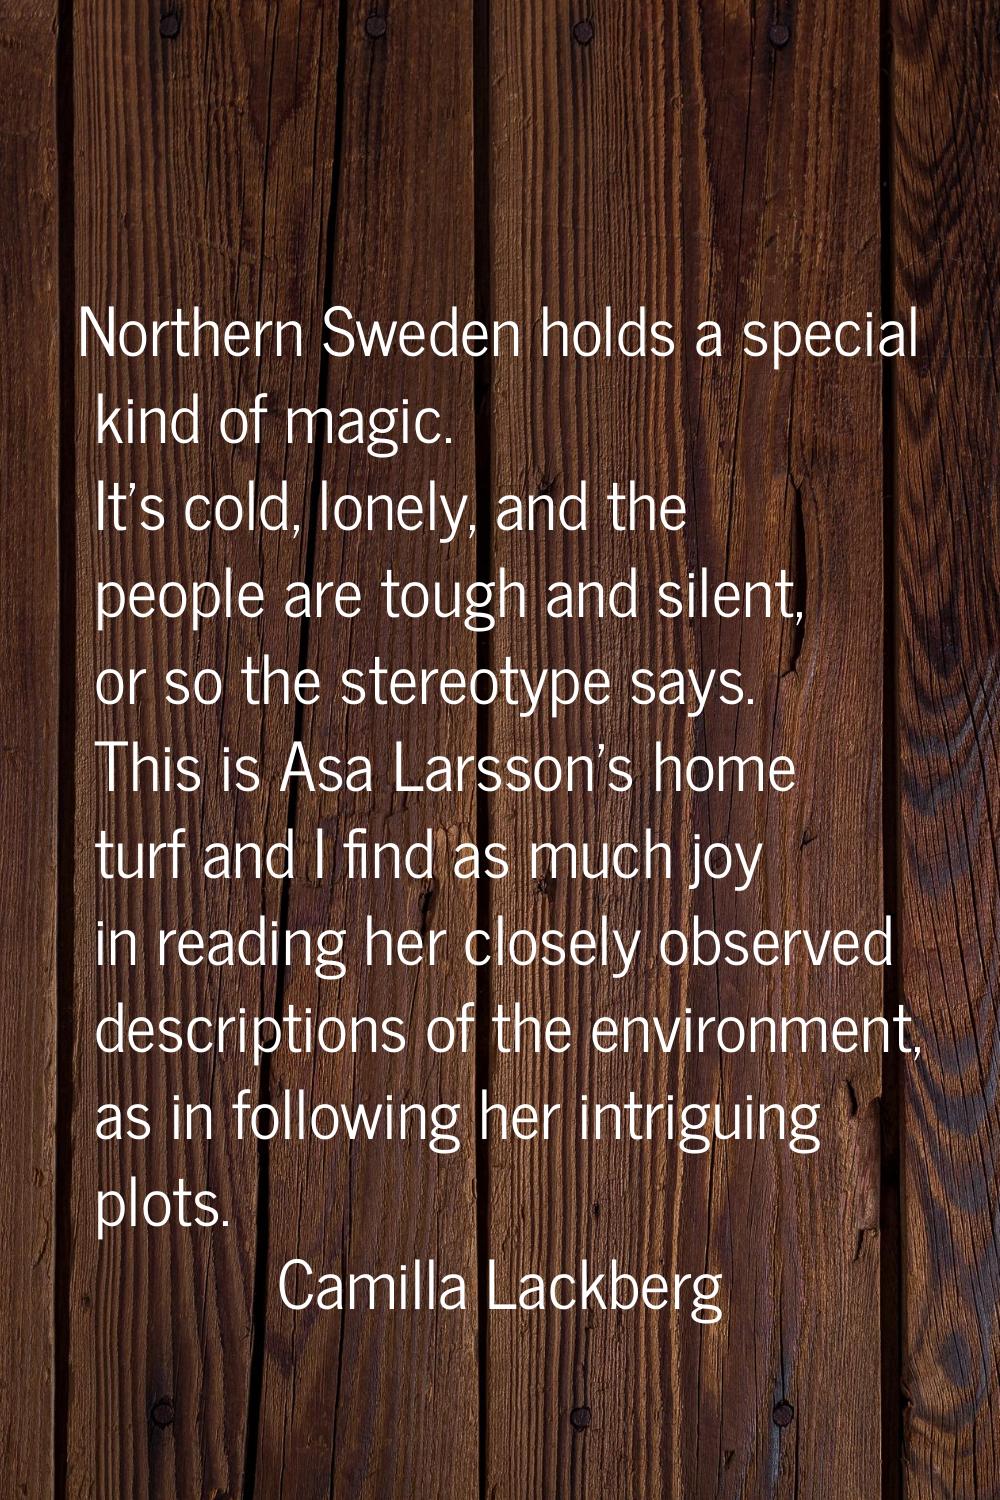 Northern Sweden holds a special kind of magic. It's cold, lonely, and the people are tough and sile